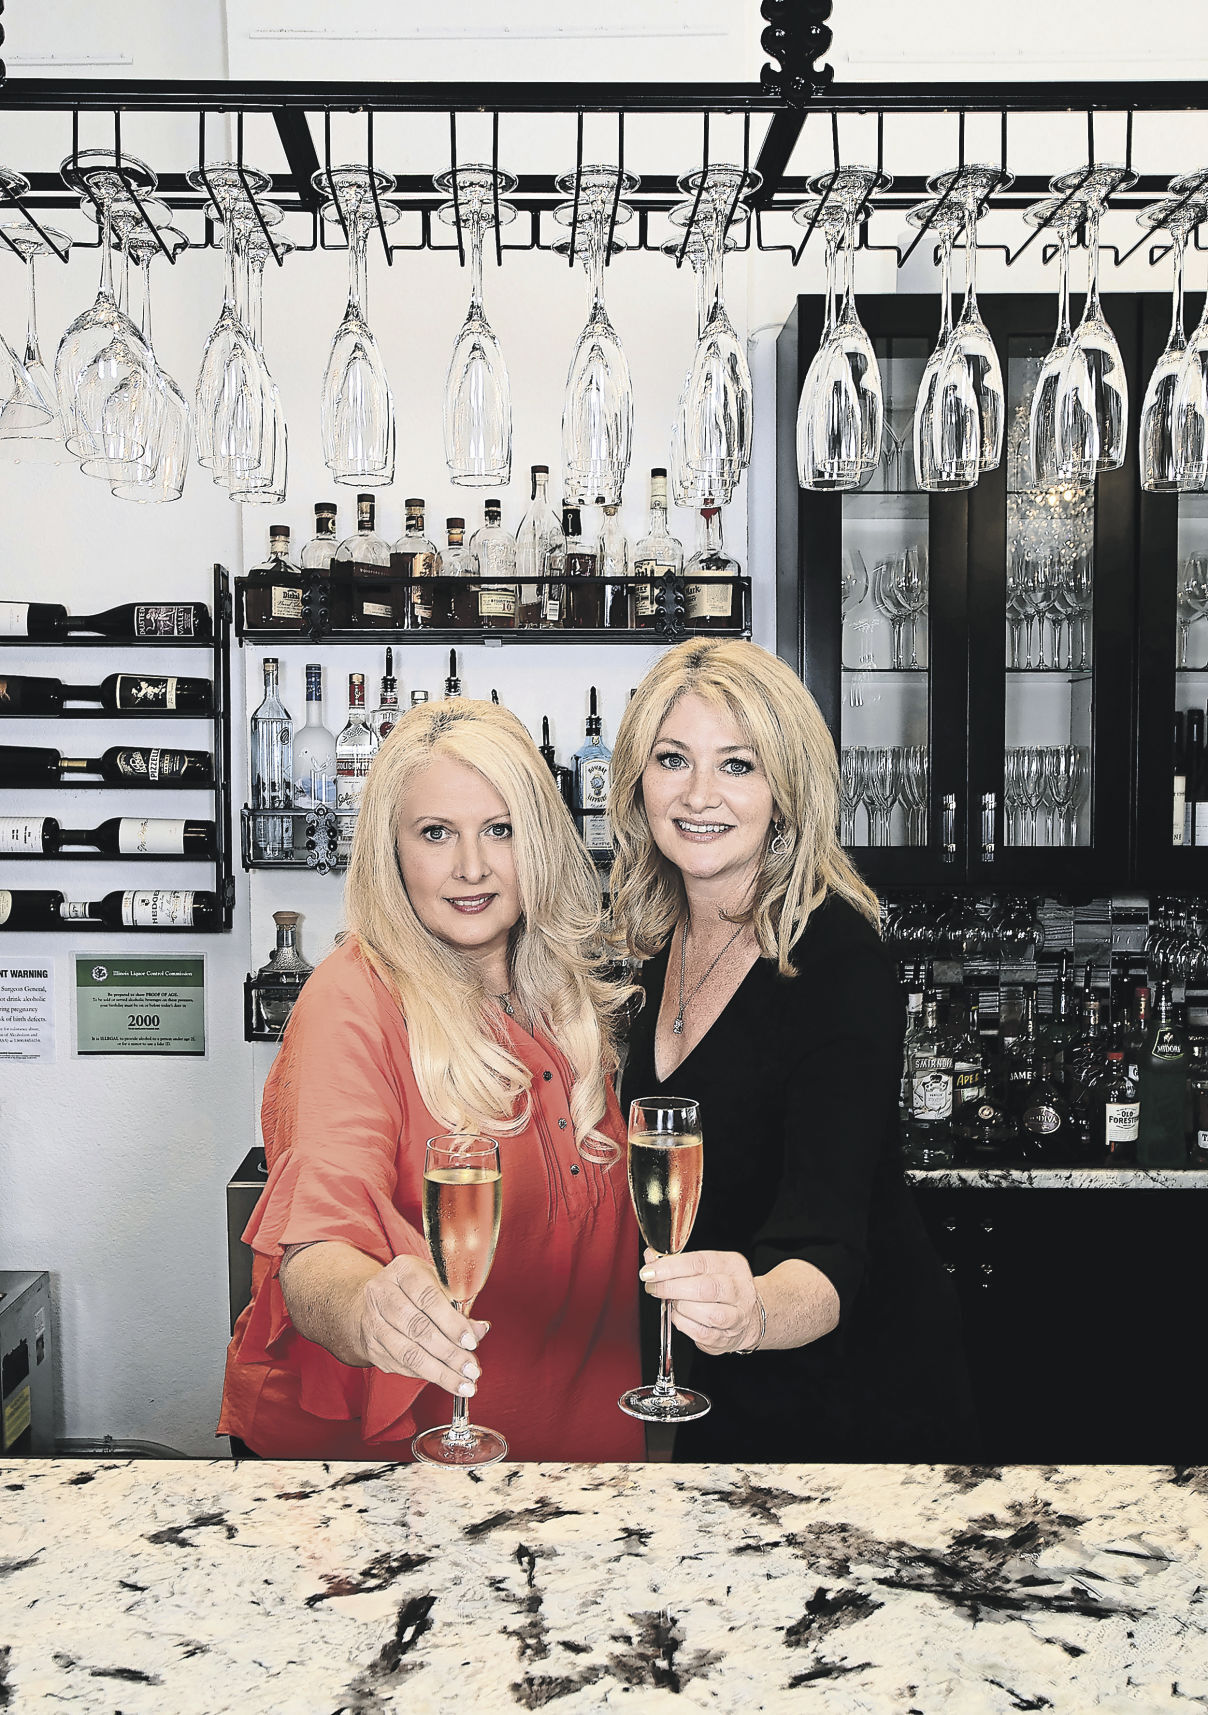 Lisa Kempner (left) and Laura Kempner at their business Champagne on Main in Galena, Ill.    PHOTO CREDIT: SYSTEM